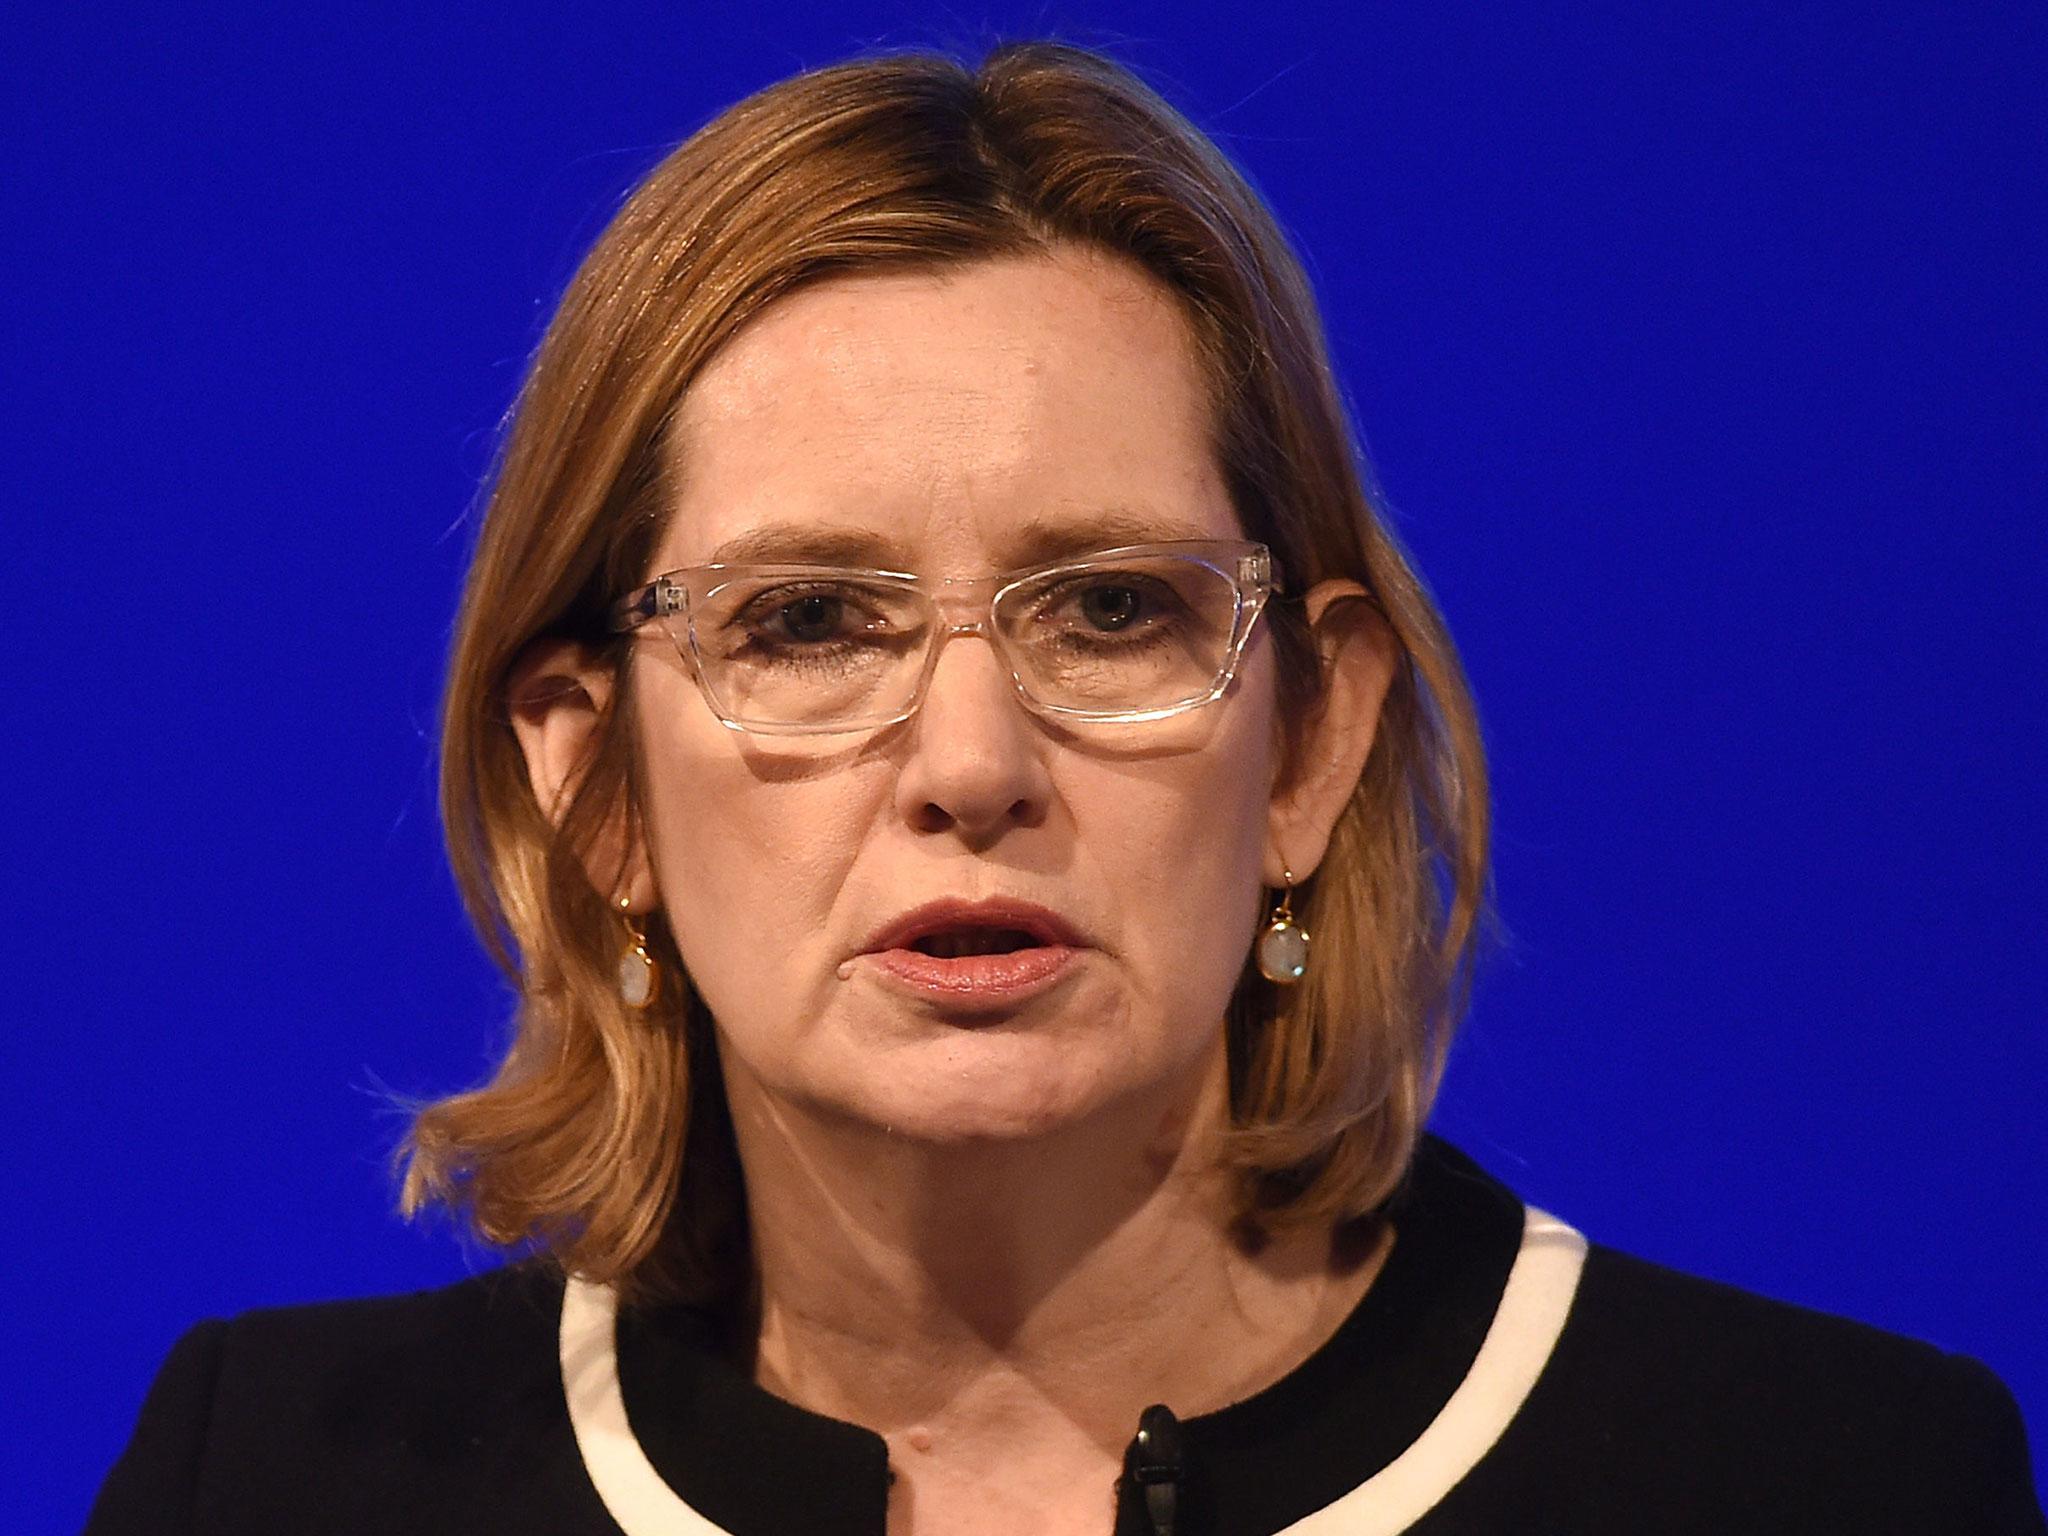 The Home Secretary chaired a COBRA meeting this afternoon following the attack